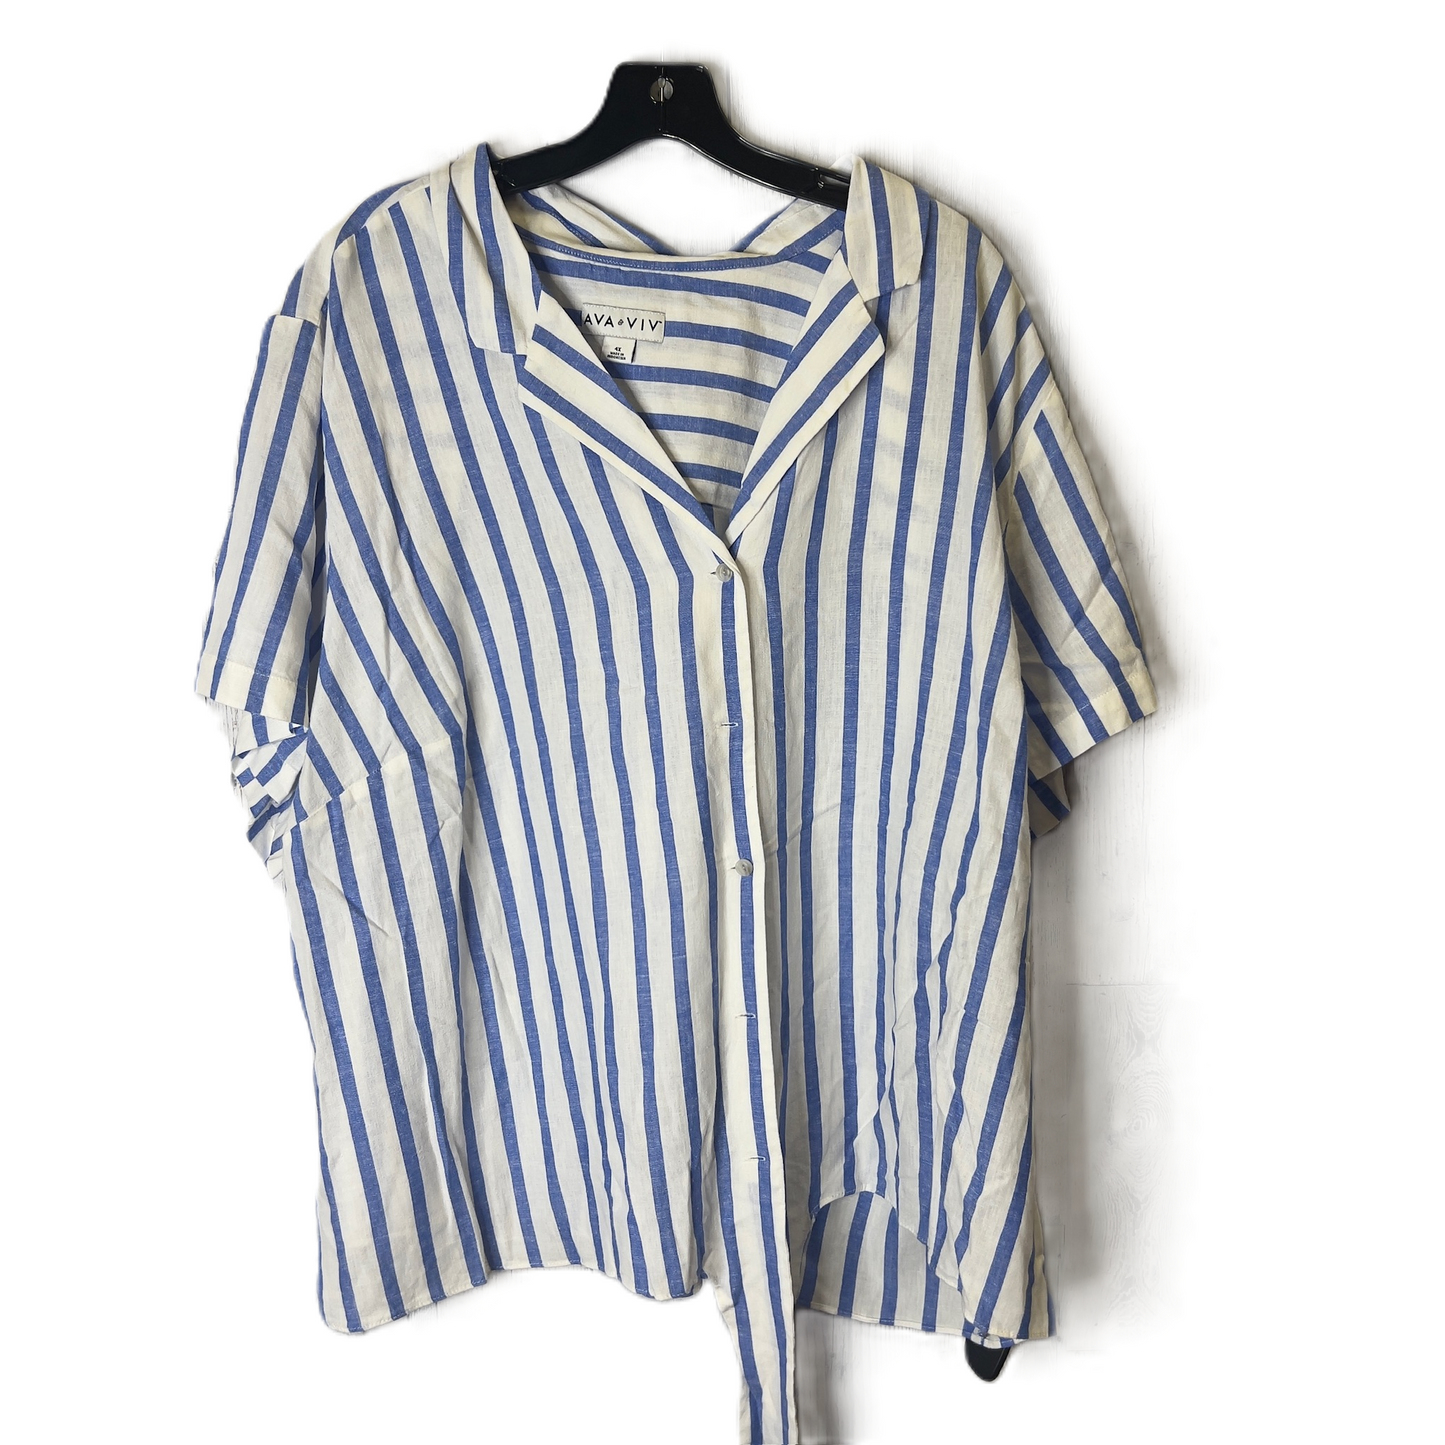 Blue & White Top Short Sleeve By Ava & Viv, Size: 4x